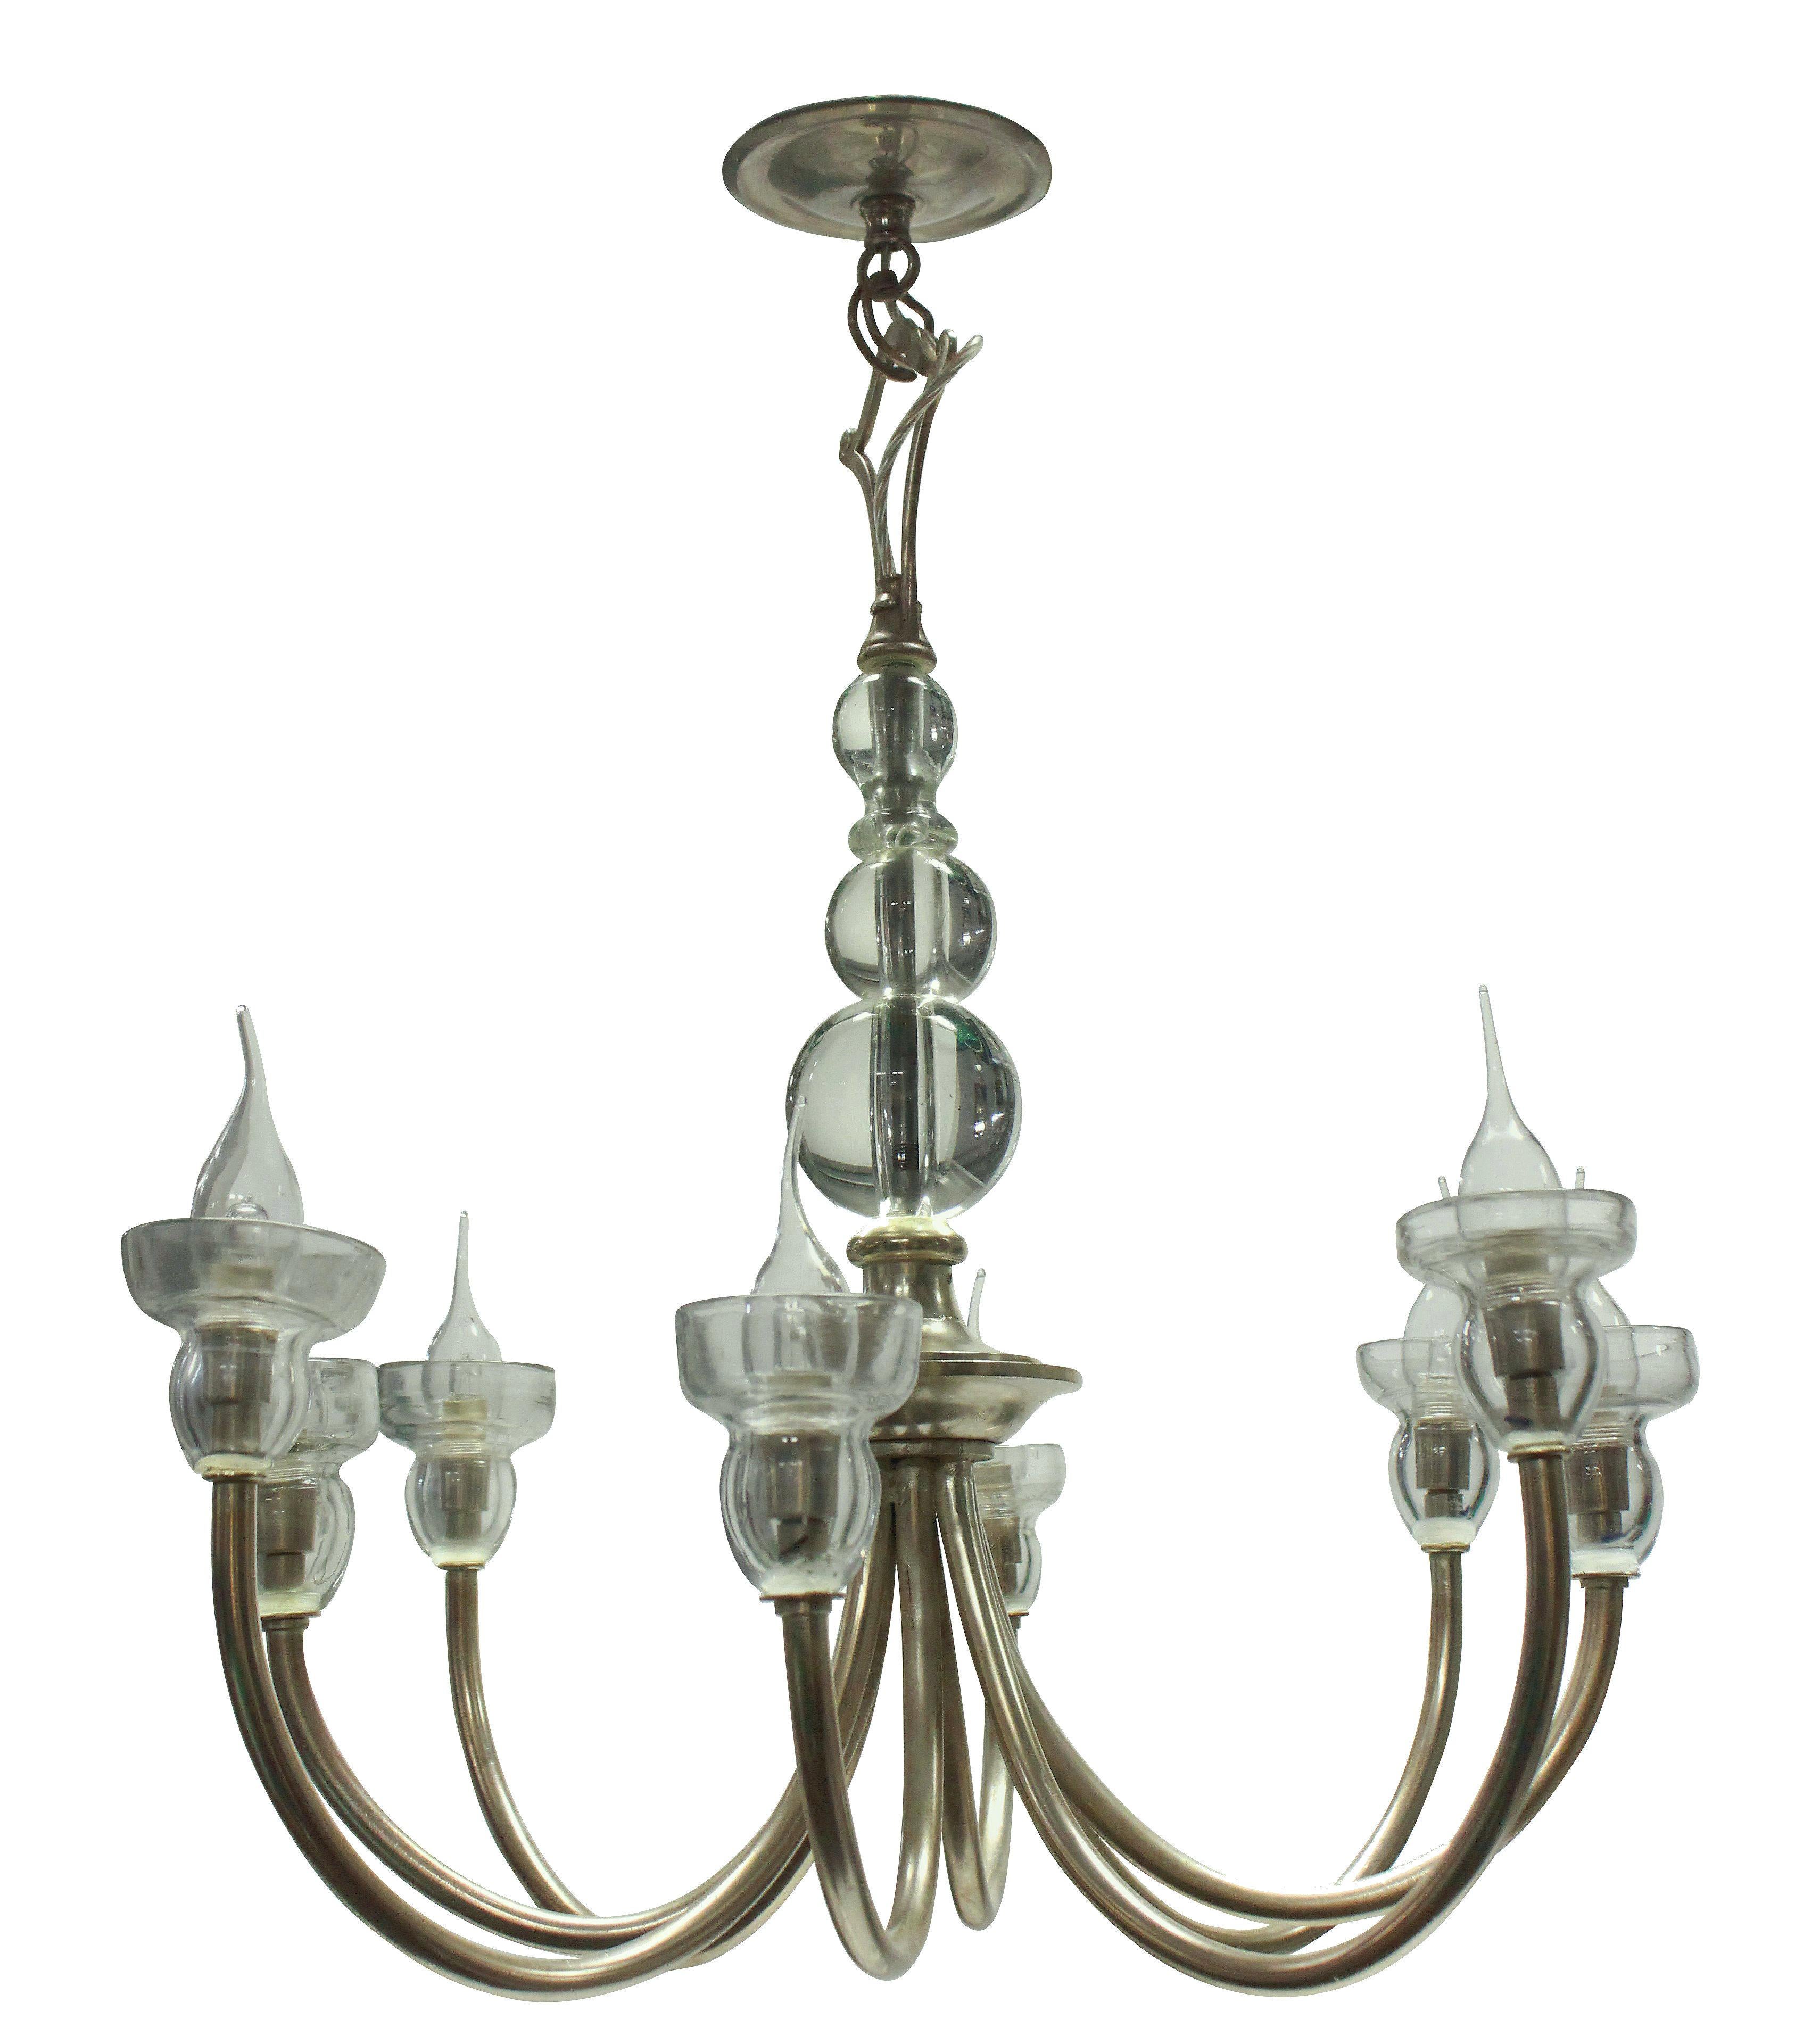 A French mid-century chandelier of interesting design in silvered metal with good quality glass detailing, with a spherical centre stem and drip sconces.